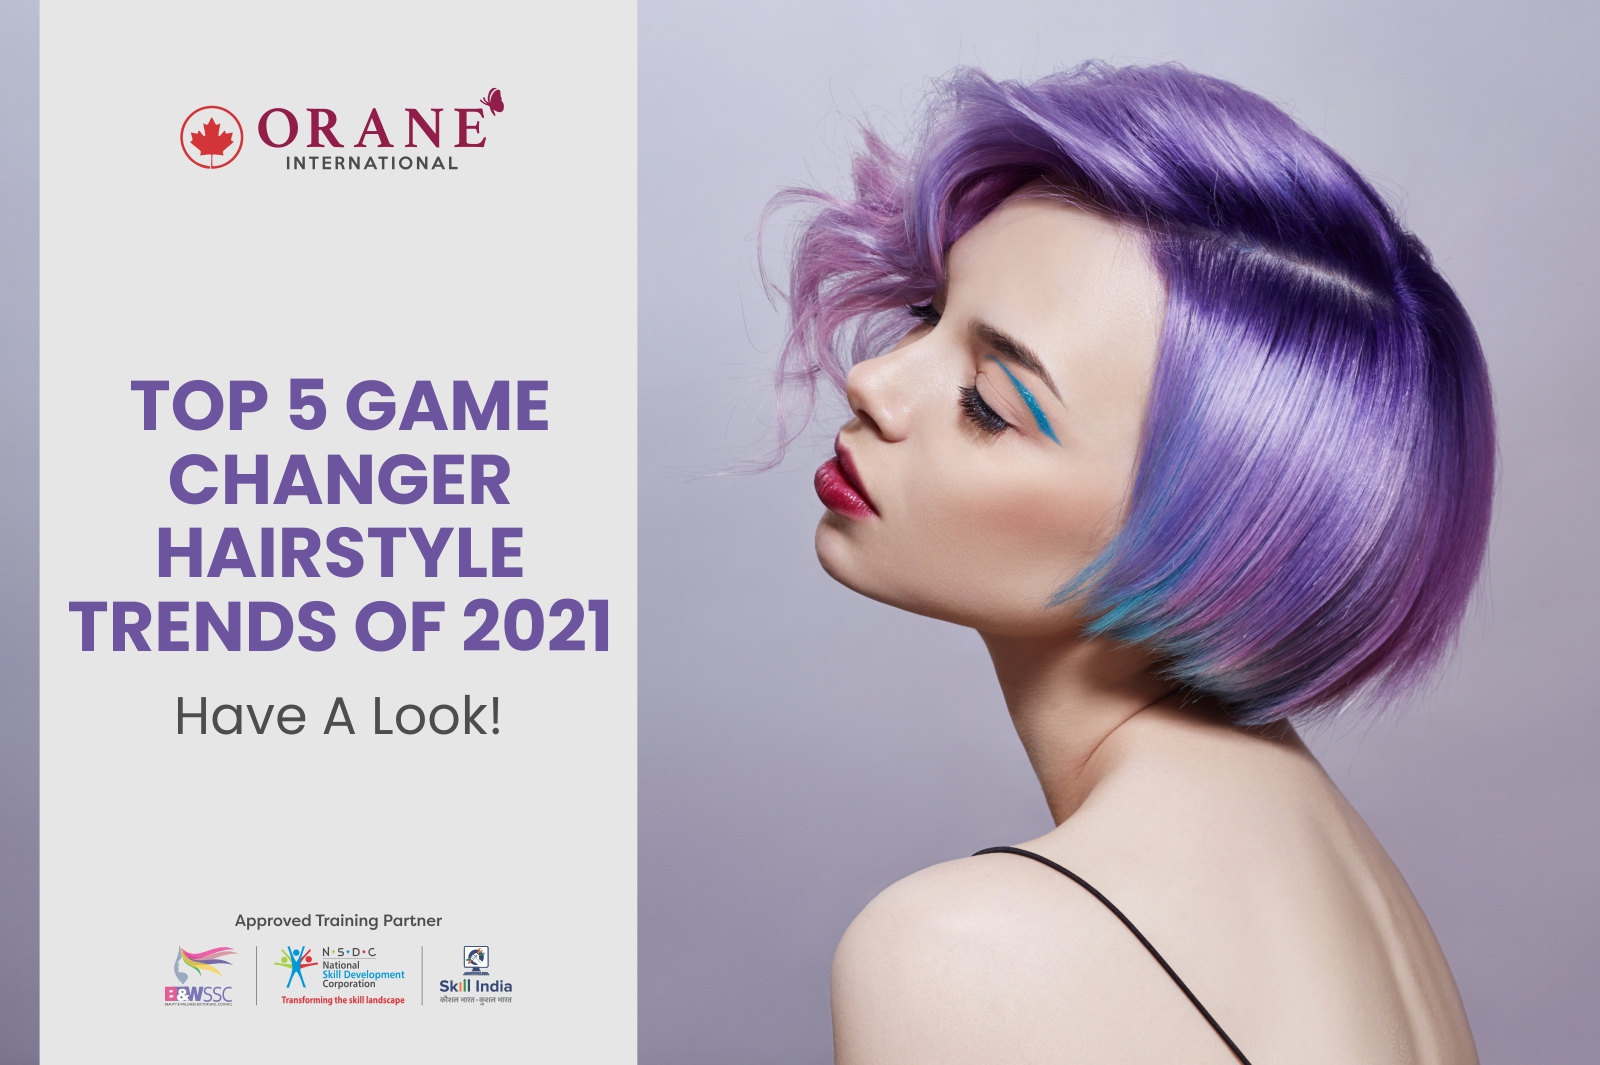 Top 5 Game Changer Hairstyle Trends Of 2021 – Have A Look! - Orane Beauty  Institute